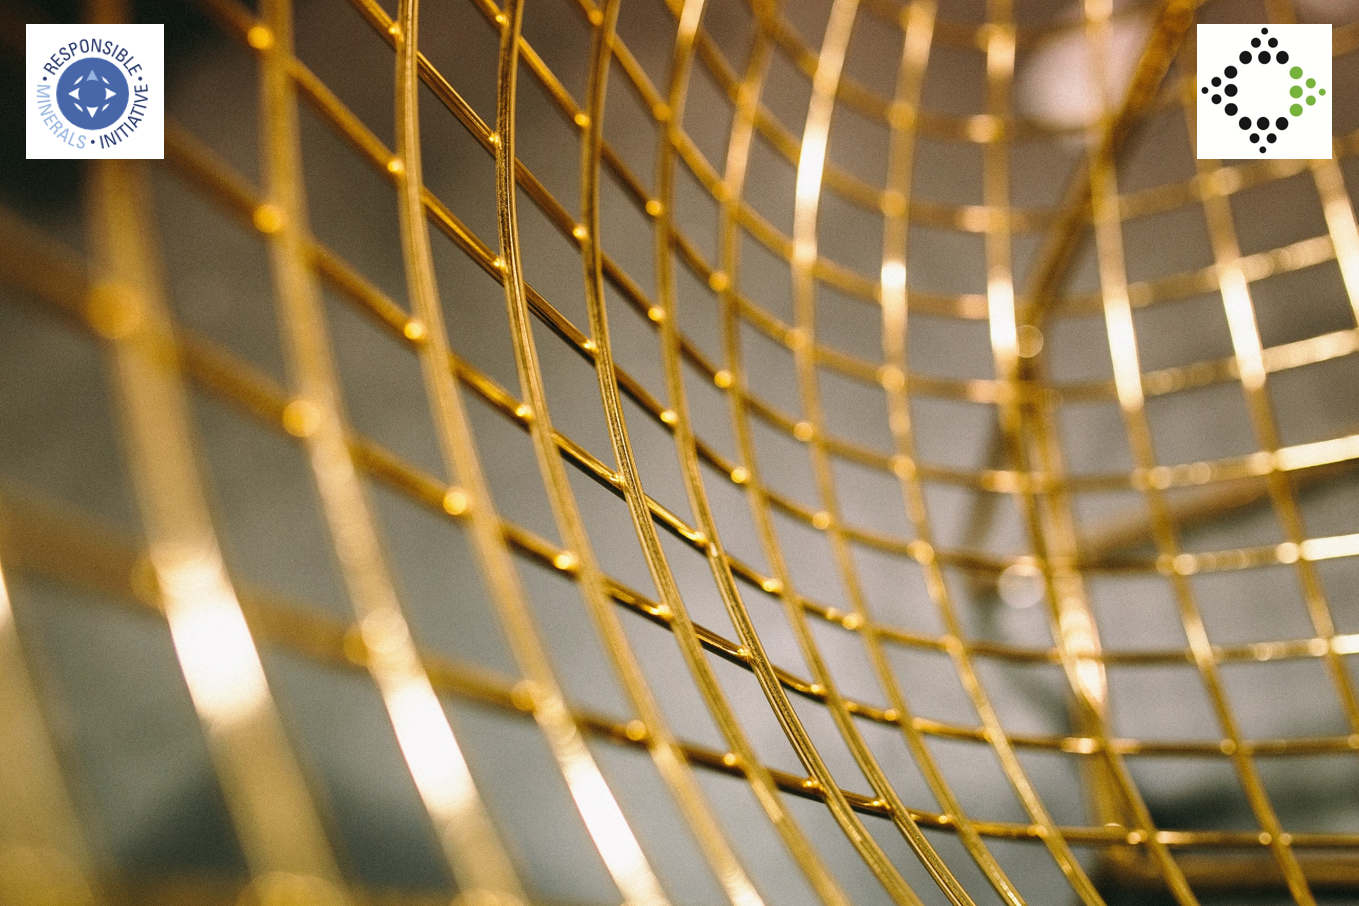 Close up image of a cross hatched gold wire basket